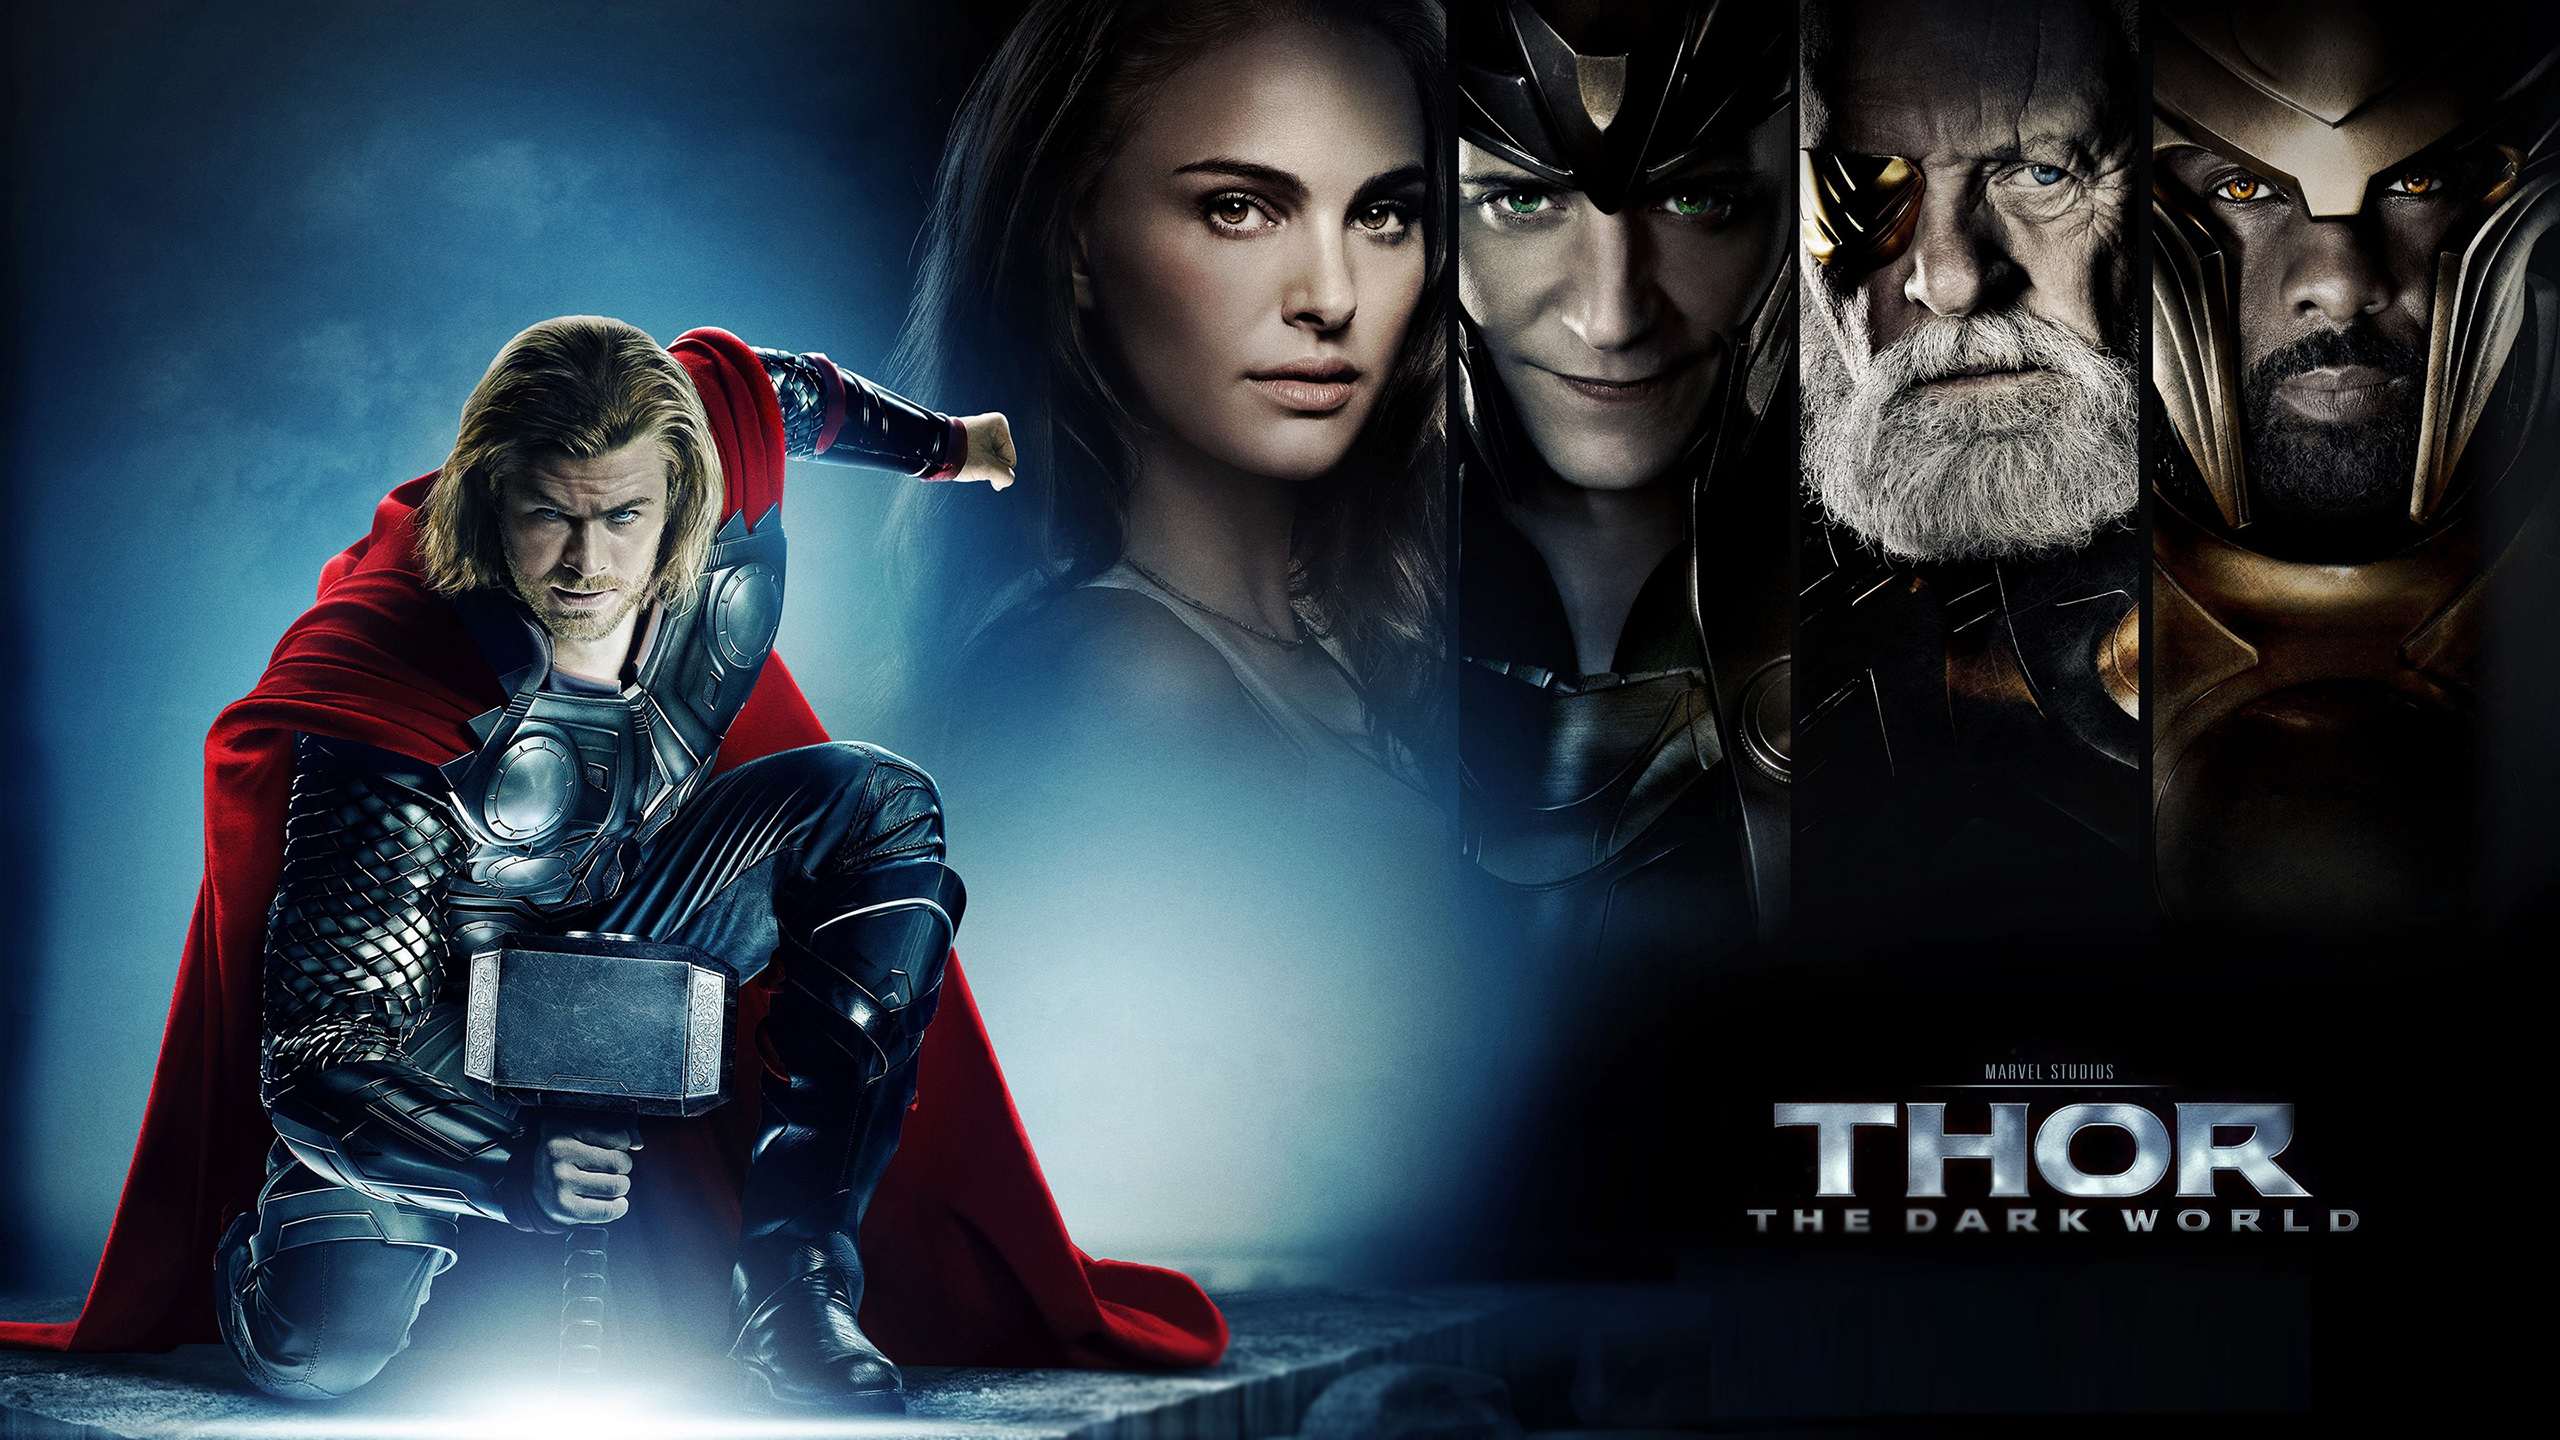  Thor 2 The Dark World Movie Wallpaper is a hi res Wallpaper 2560x1440